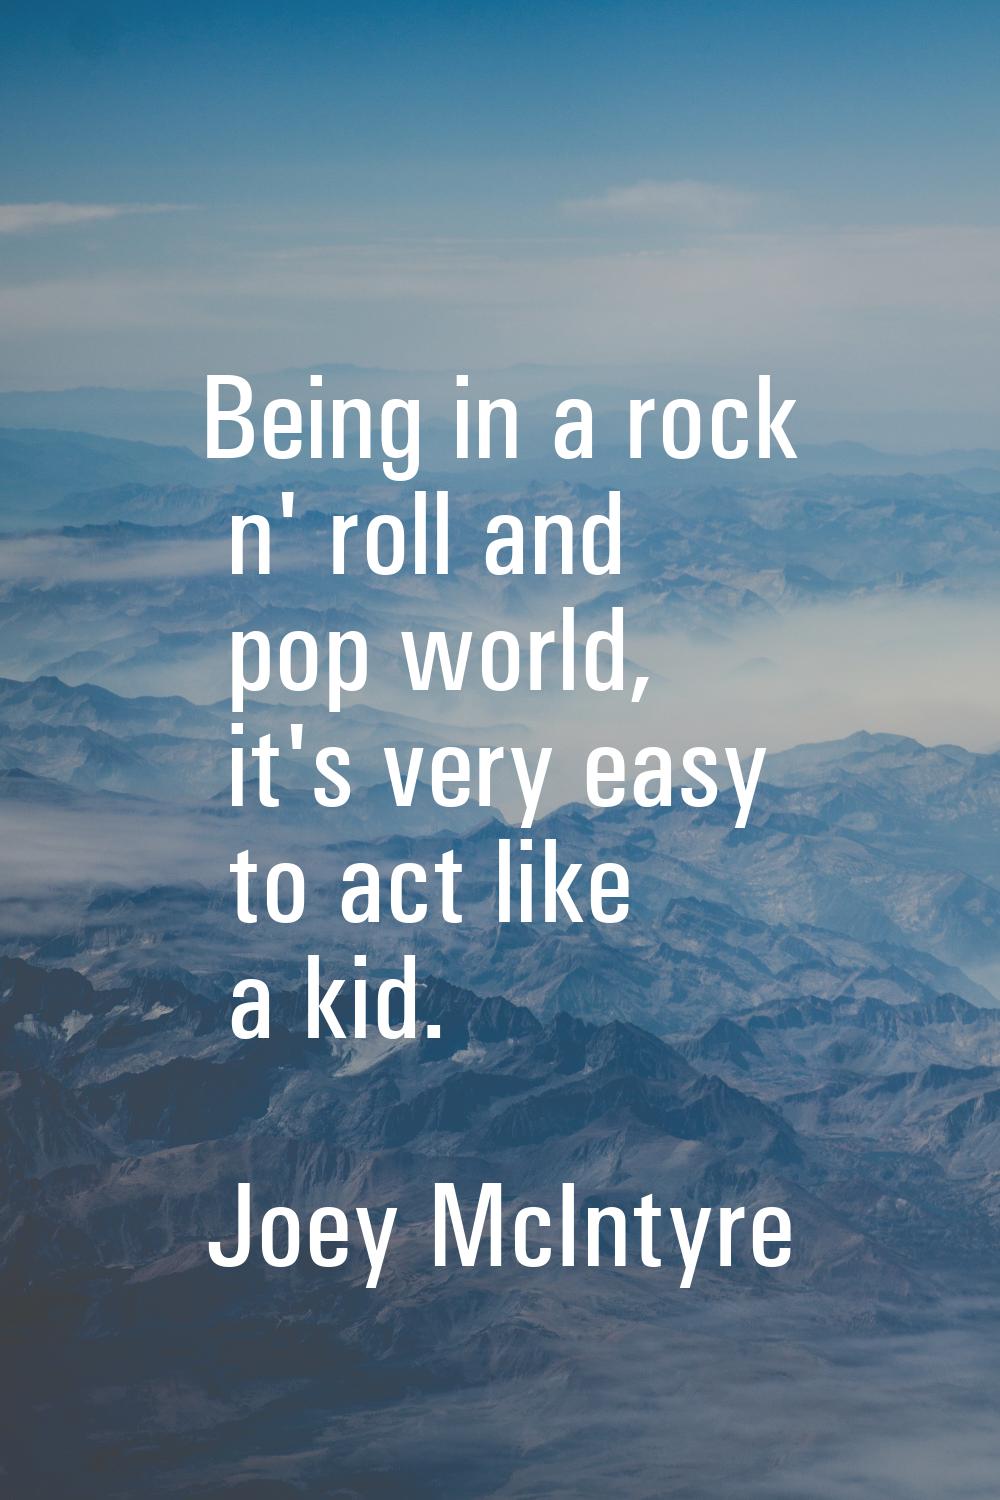 Being in a rock n' roll and pop world, it's very easy to act like a kid.